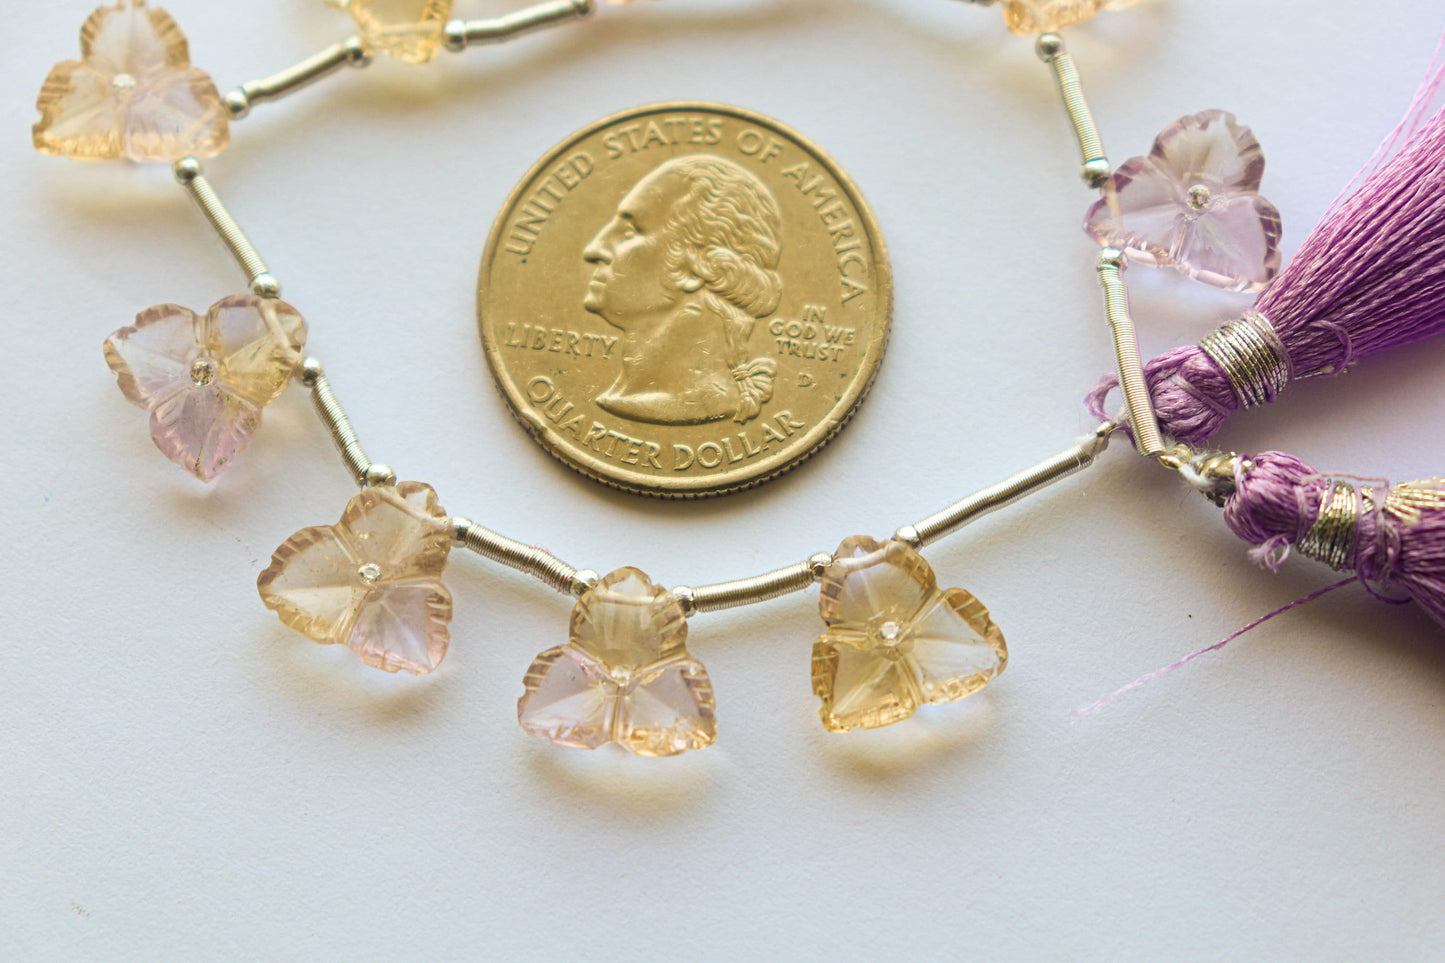 Ametrine Beads Flower Carving with White Cubic Zirconia, 11x11mm, 10 Pieces, Natural Ametrine Gemstone, Beadsforyourjewellery